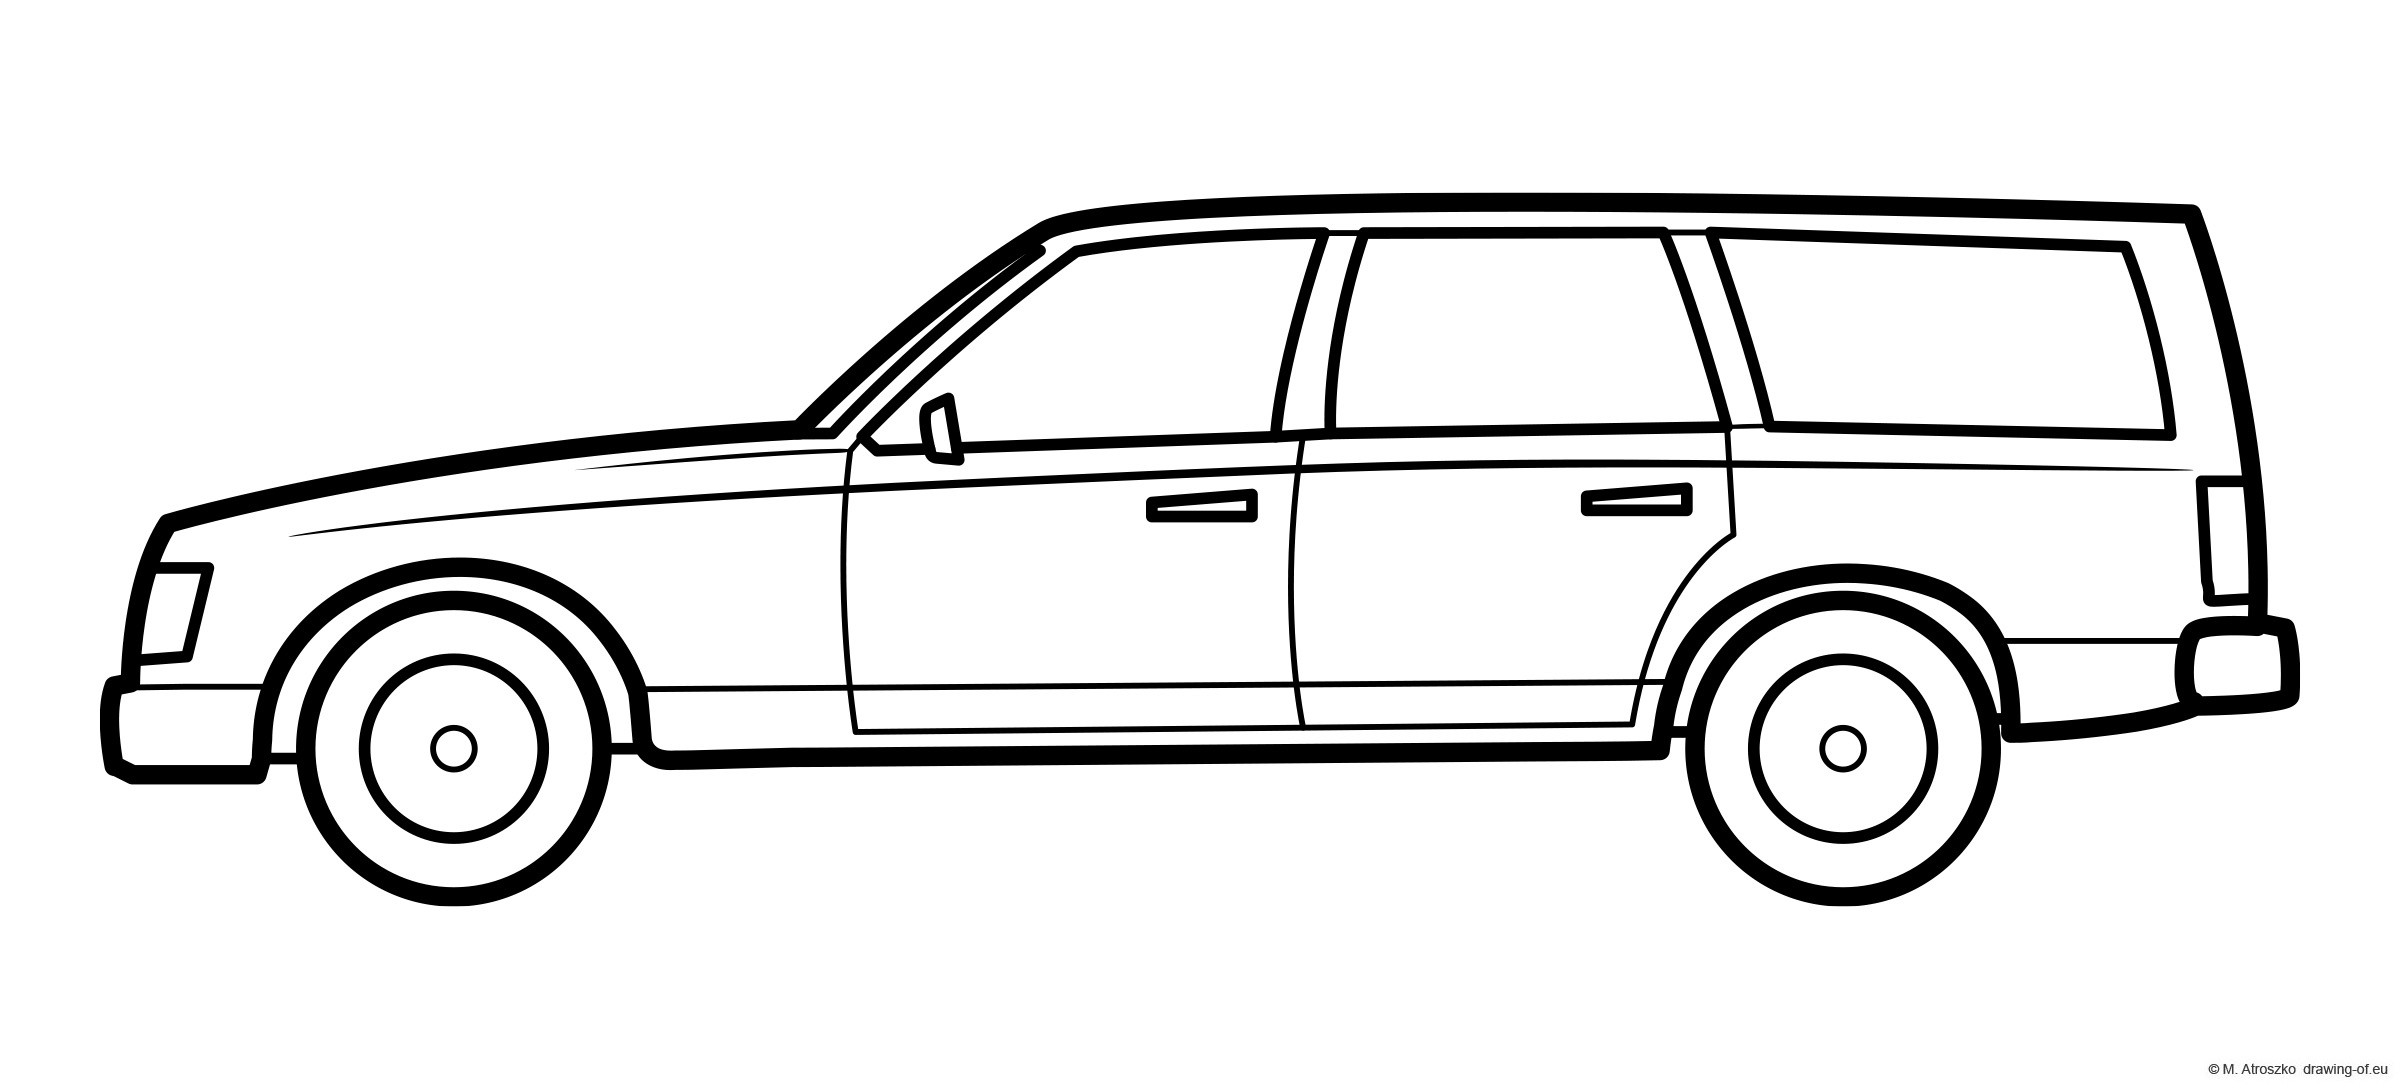 Combi car coloring page